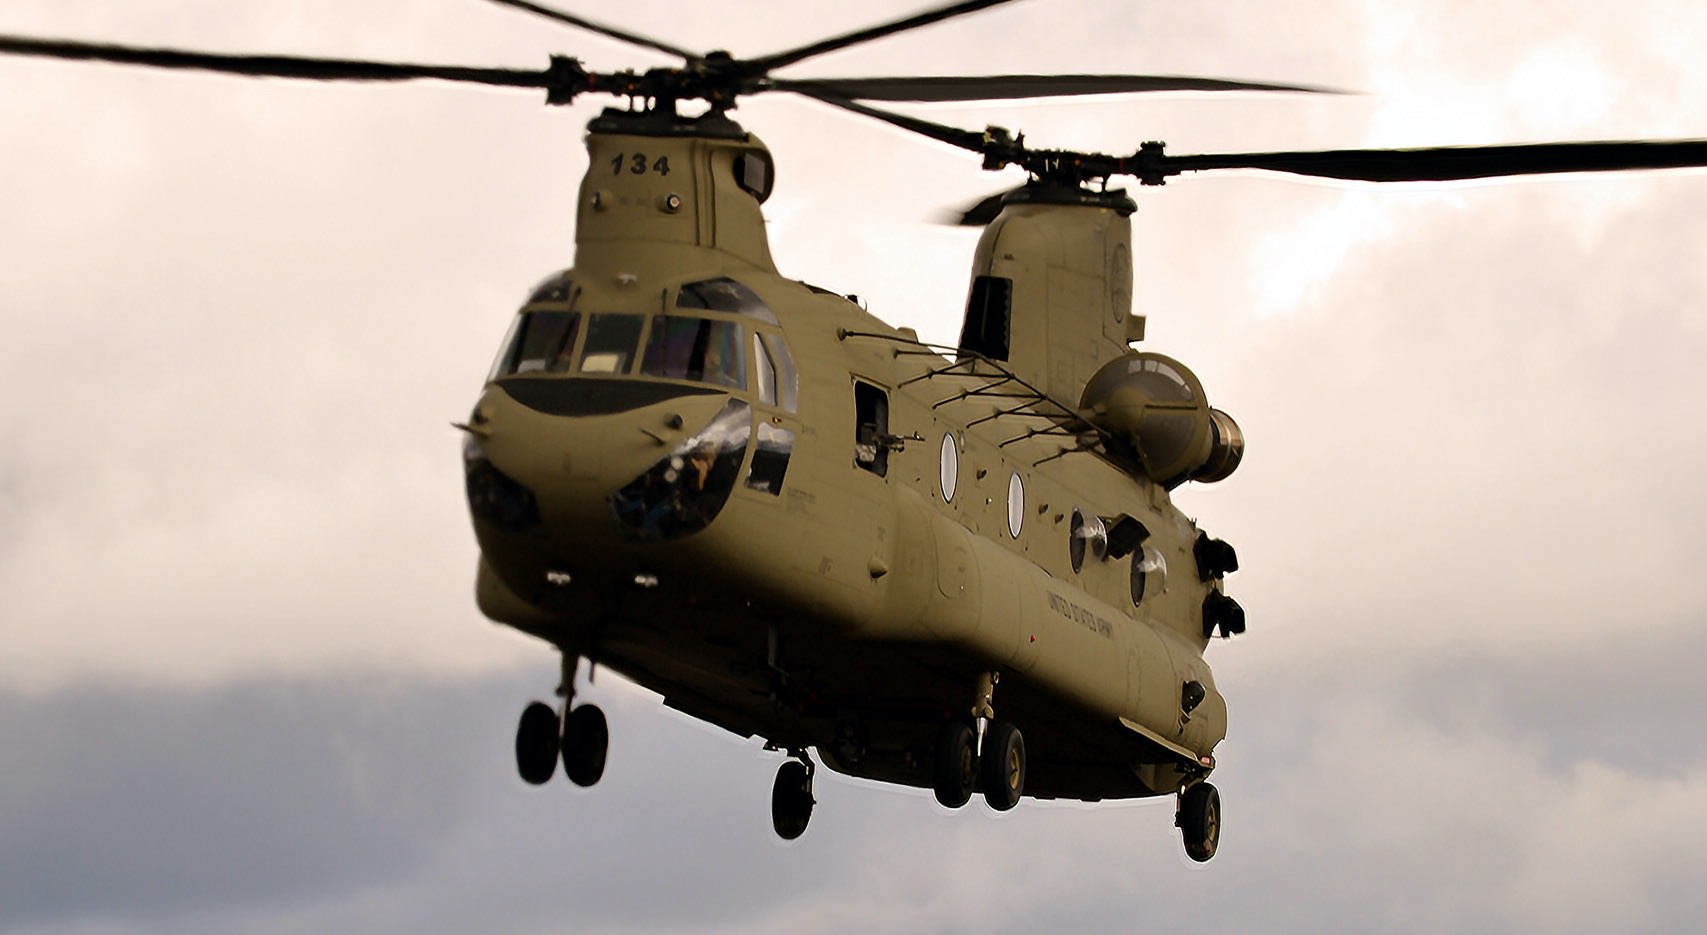 chinook boeing flight ch 47 manuals pdf ebook ch47 keyword searchable contains magazines personal